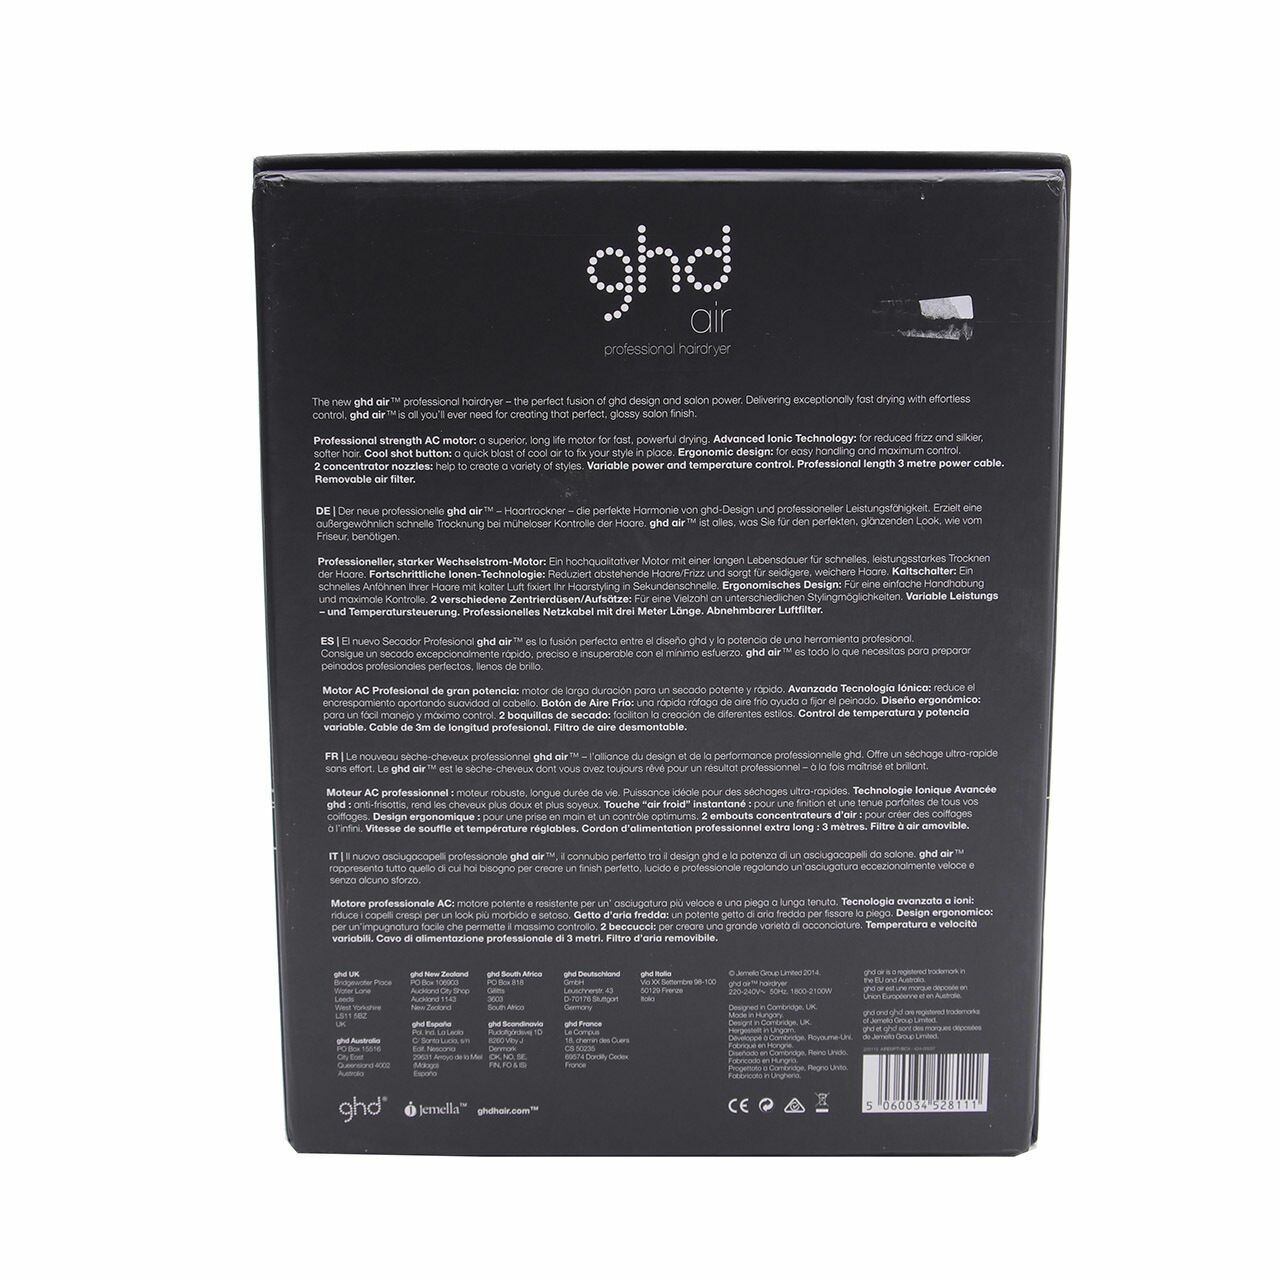 ghd air Black Professional Hairdryer Tools